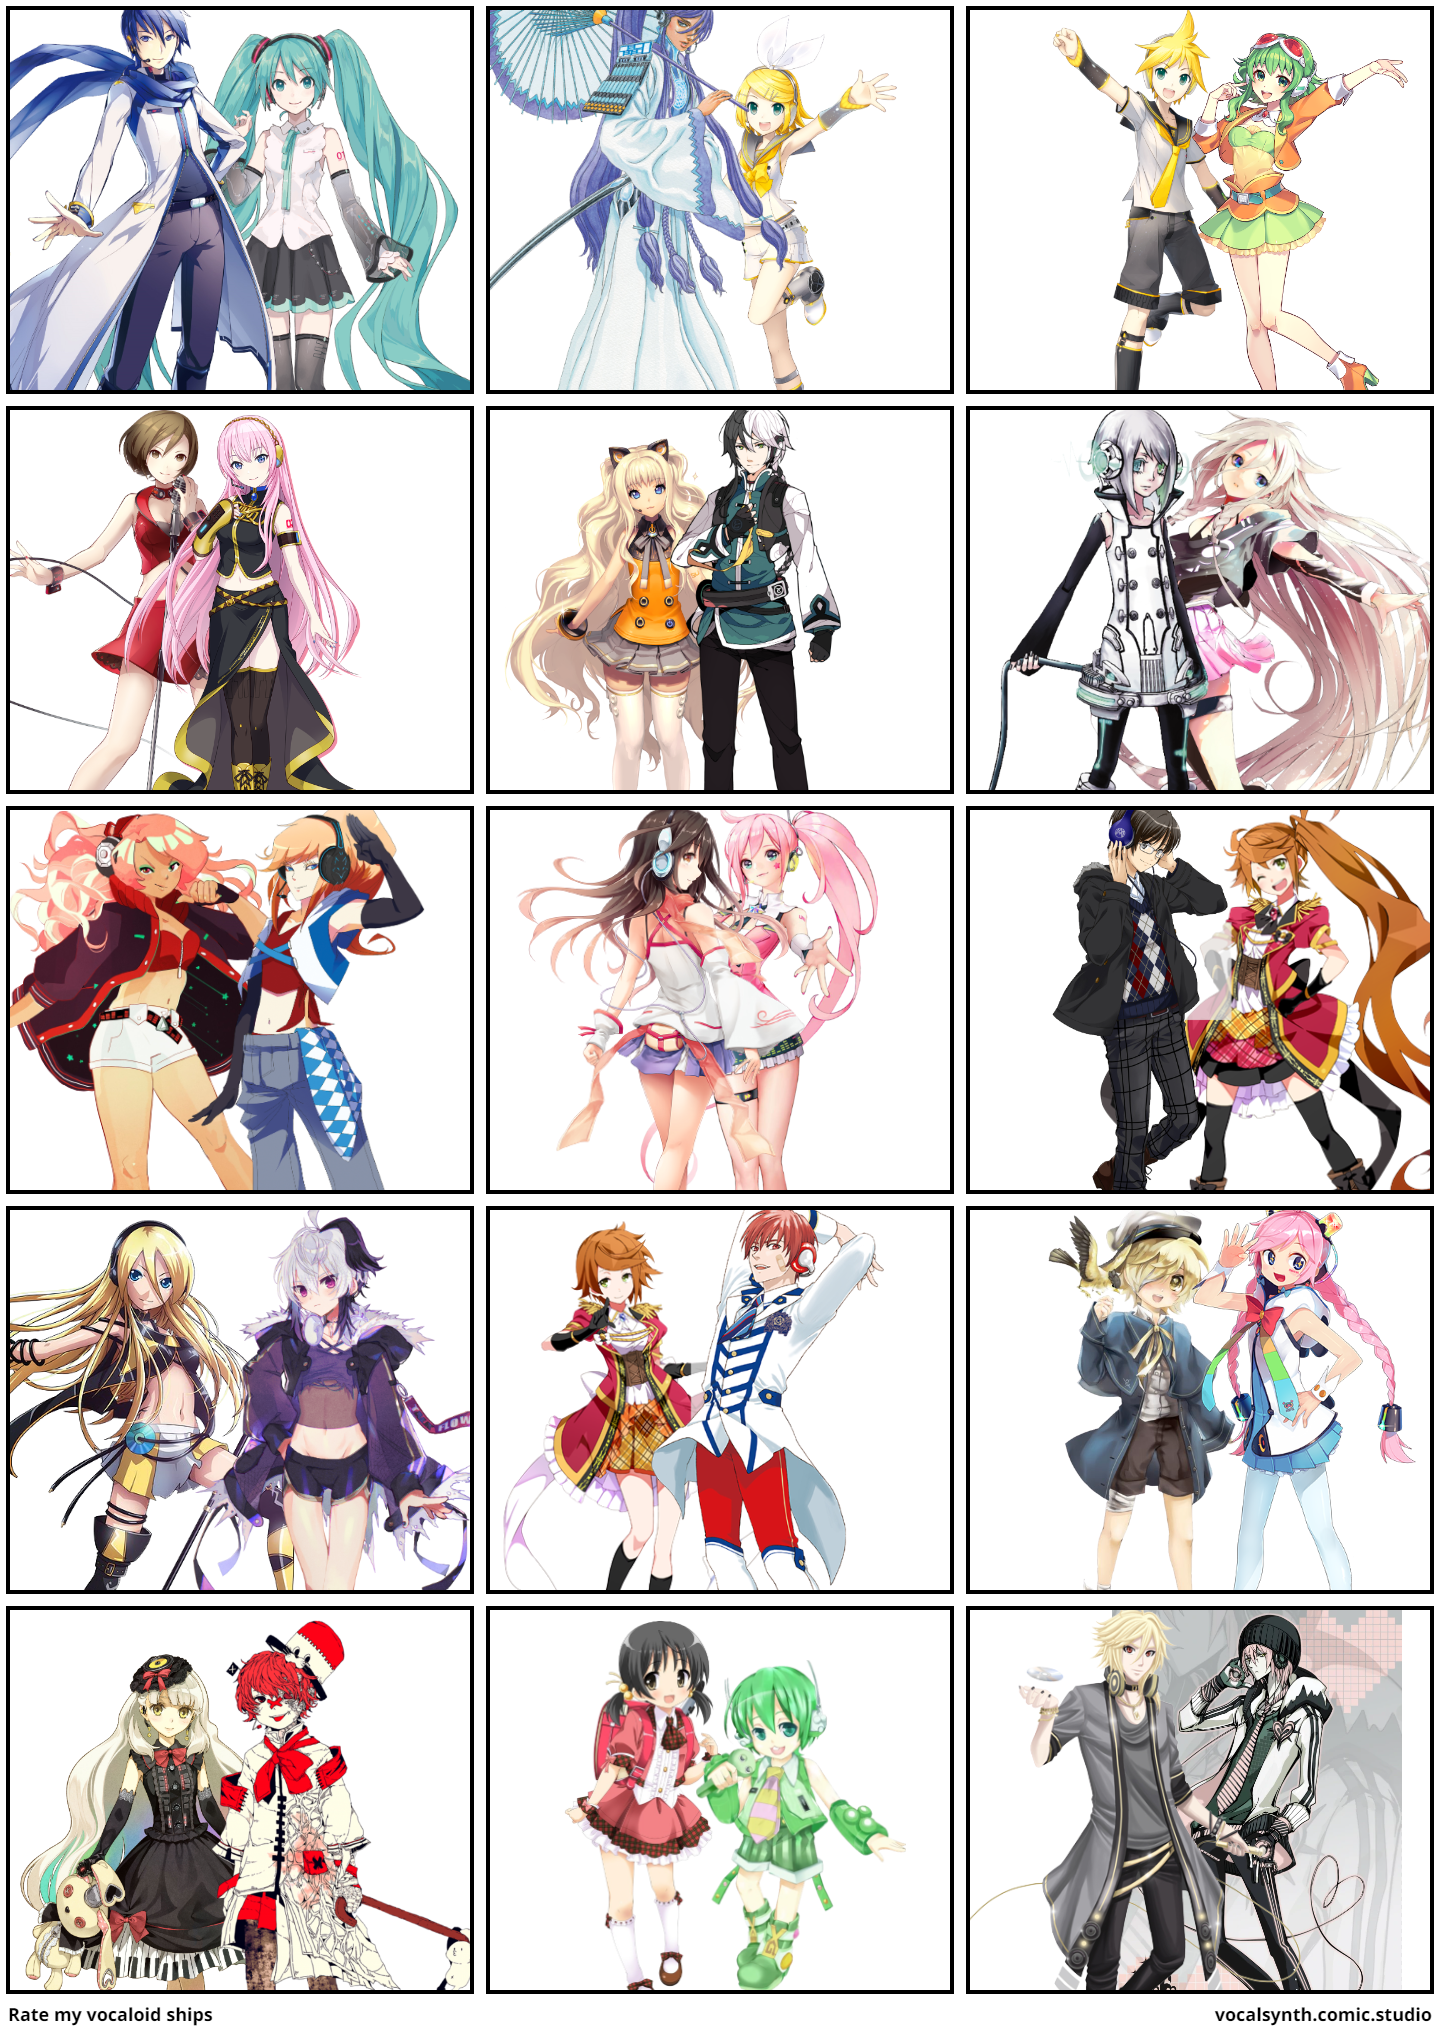 Rate my vocaloid ships